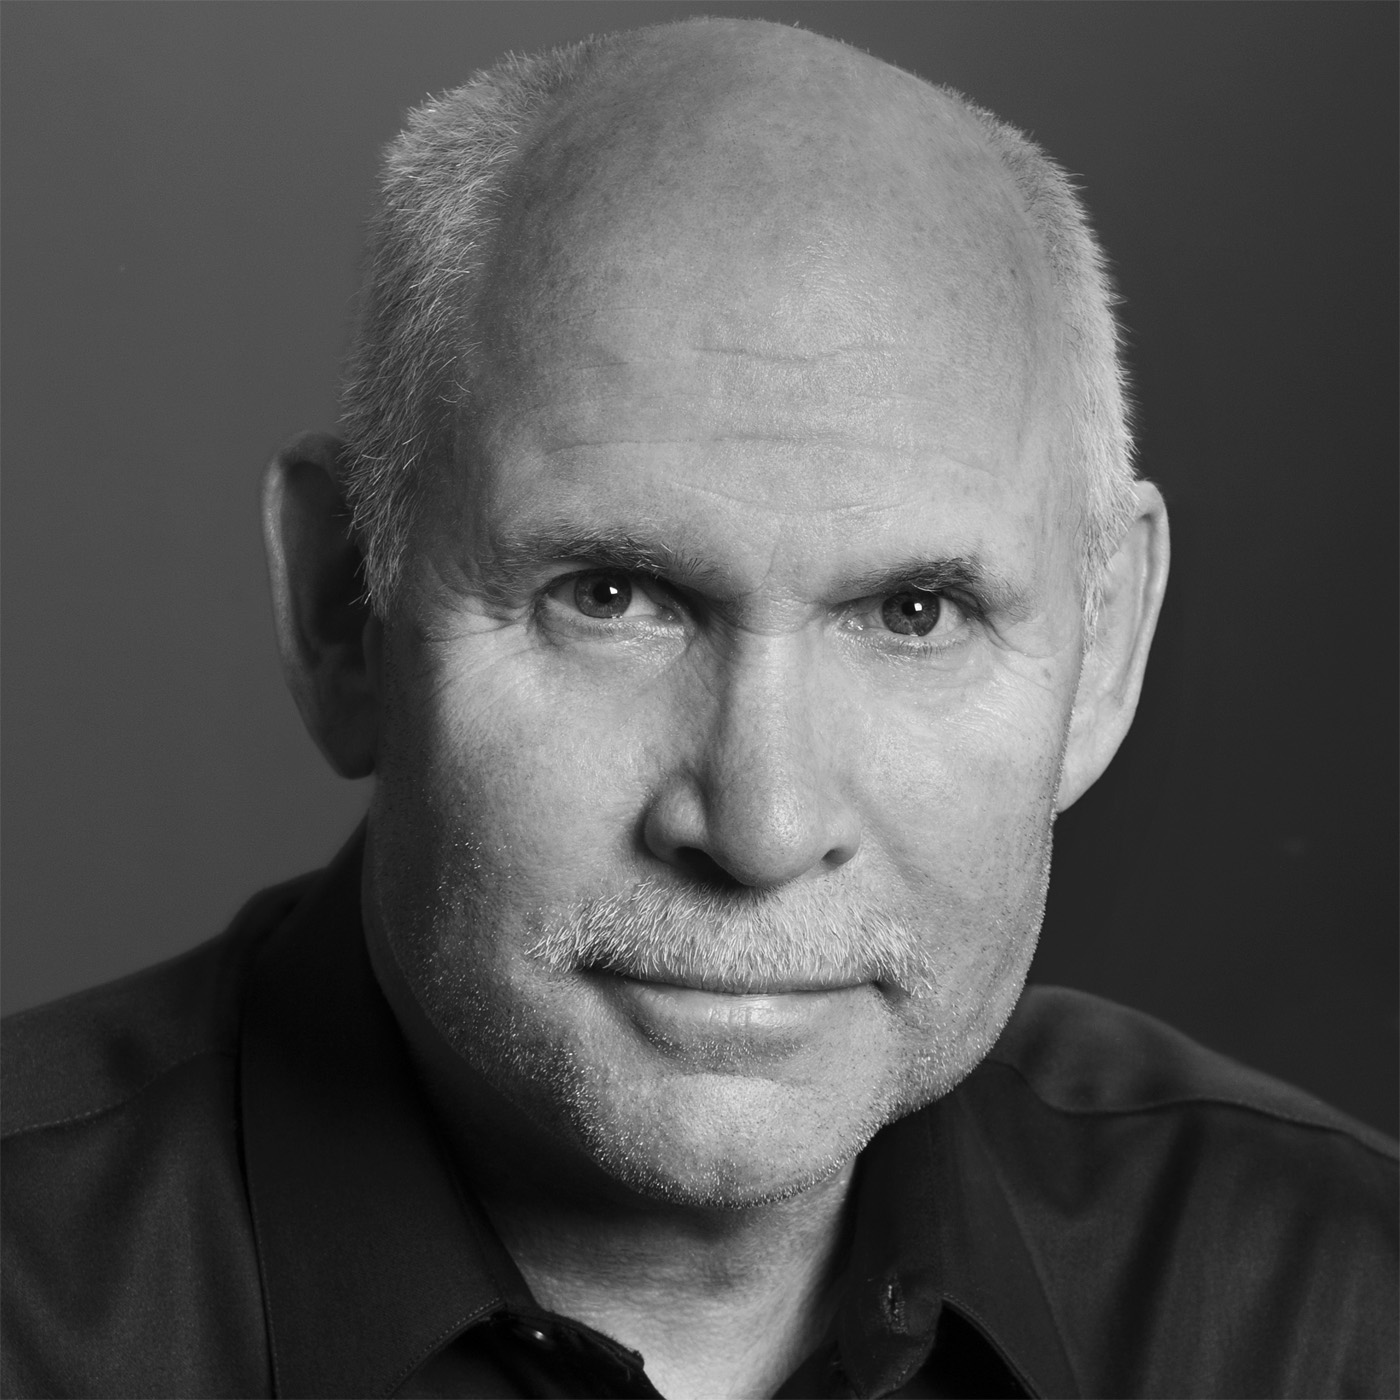 Steve McCurry, recipient of the 2020 Cherry Kearton Medal and Award.